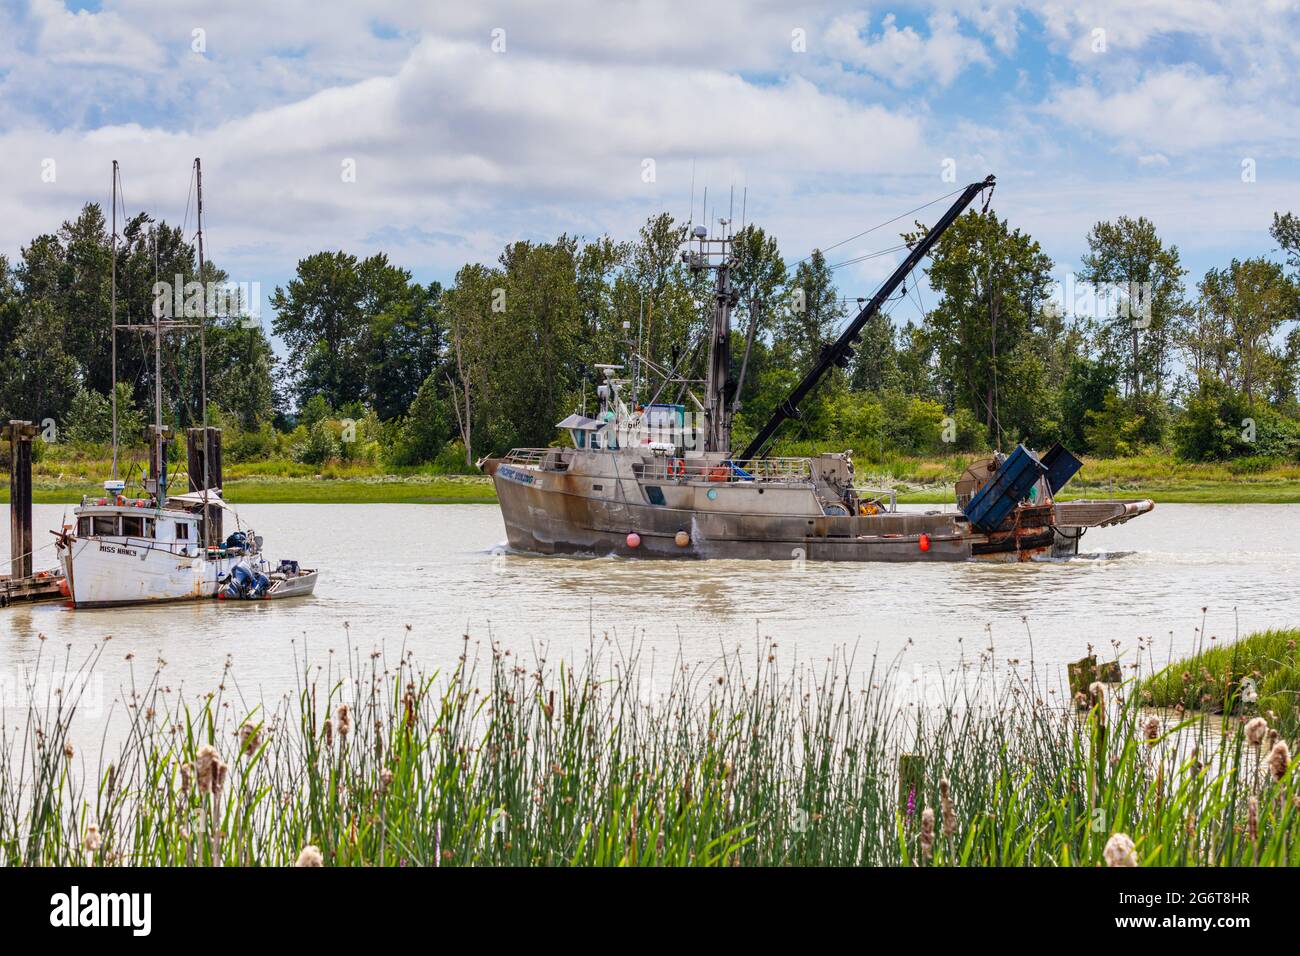 https://c8.alamy.com/comp/2G6T8HR/fishing-vessel-pacific-viking-returning-to-steveston-harbour-on-the-fraser-river-near-vancouver-british-columbia-canada-2G6T8HR.jpg